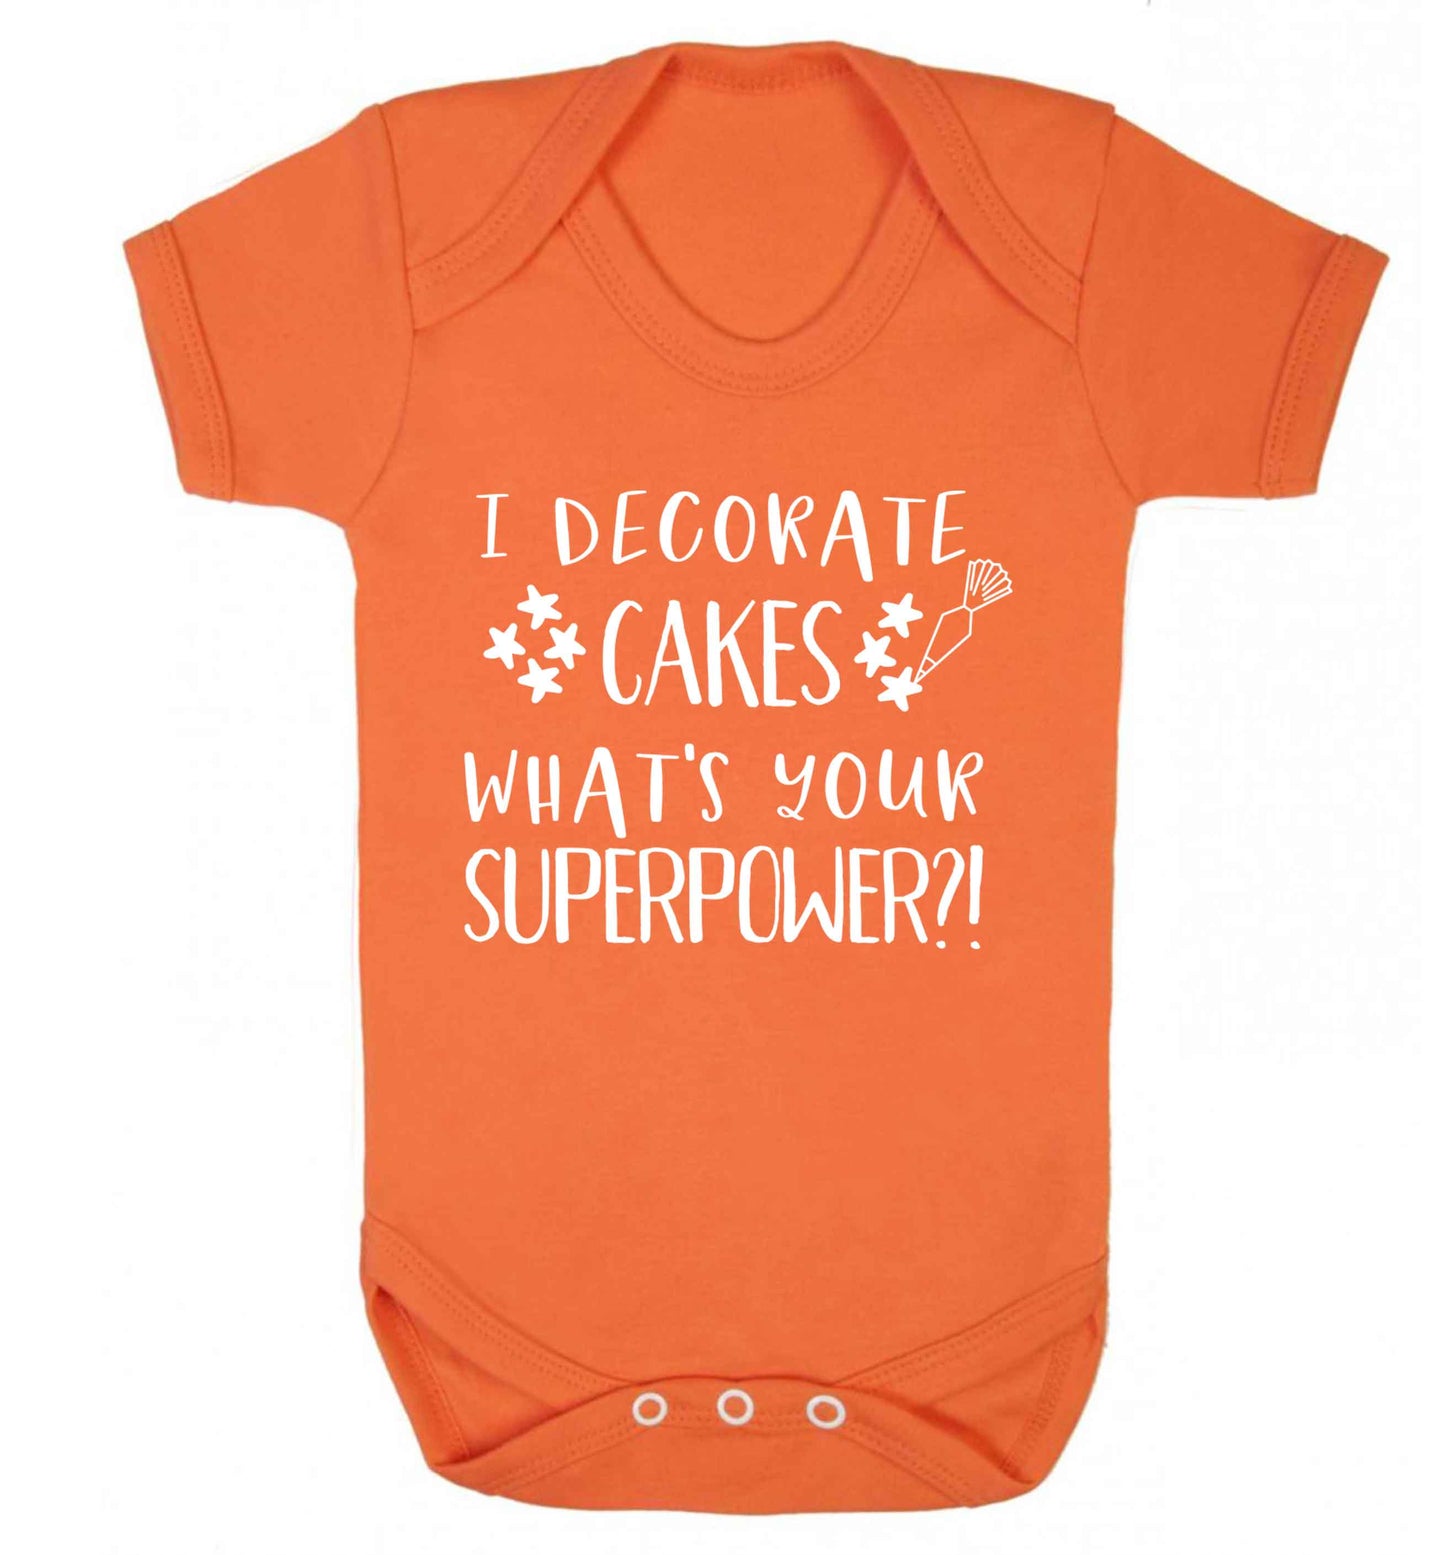 I decorate cakes what's your superpower?! Baby Vest orange 18-24 months